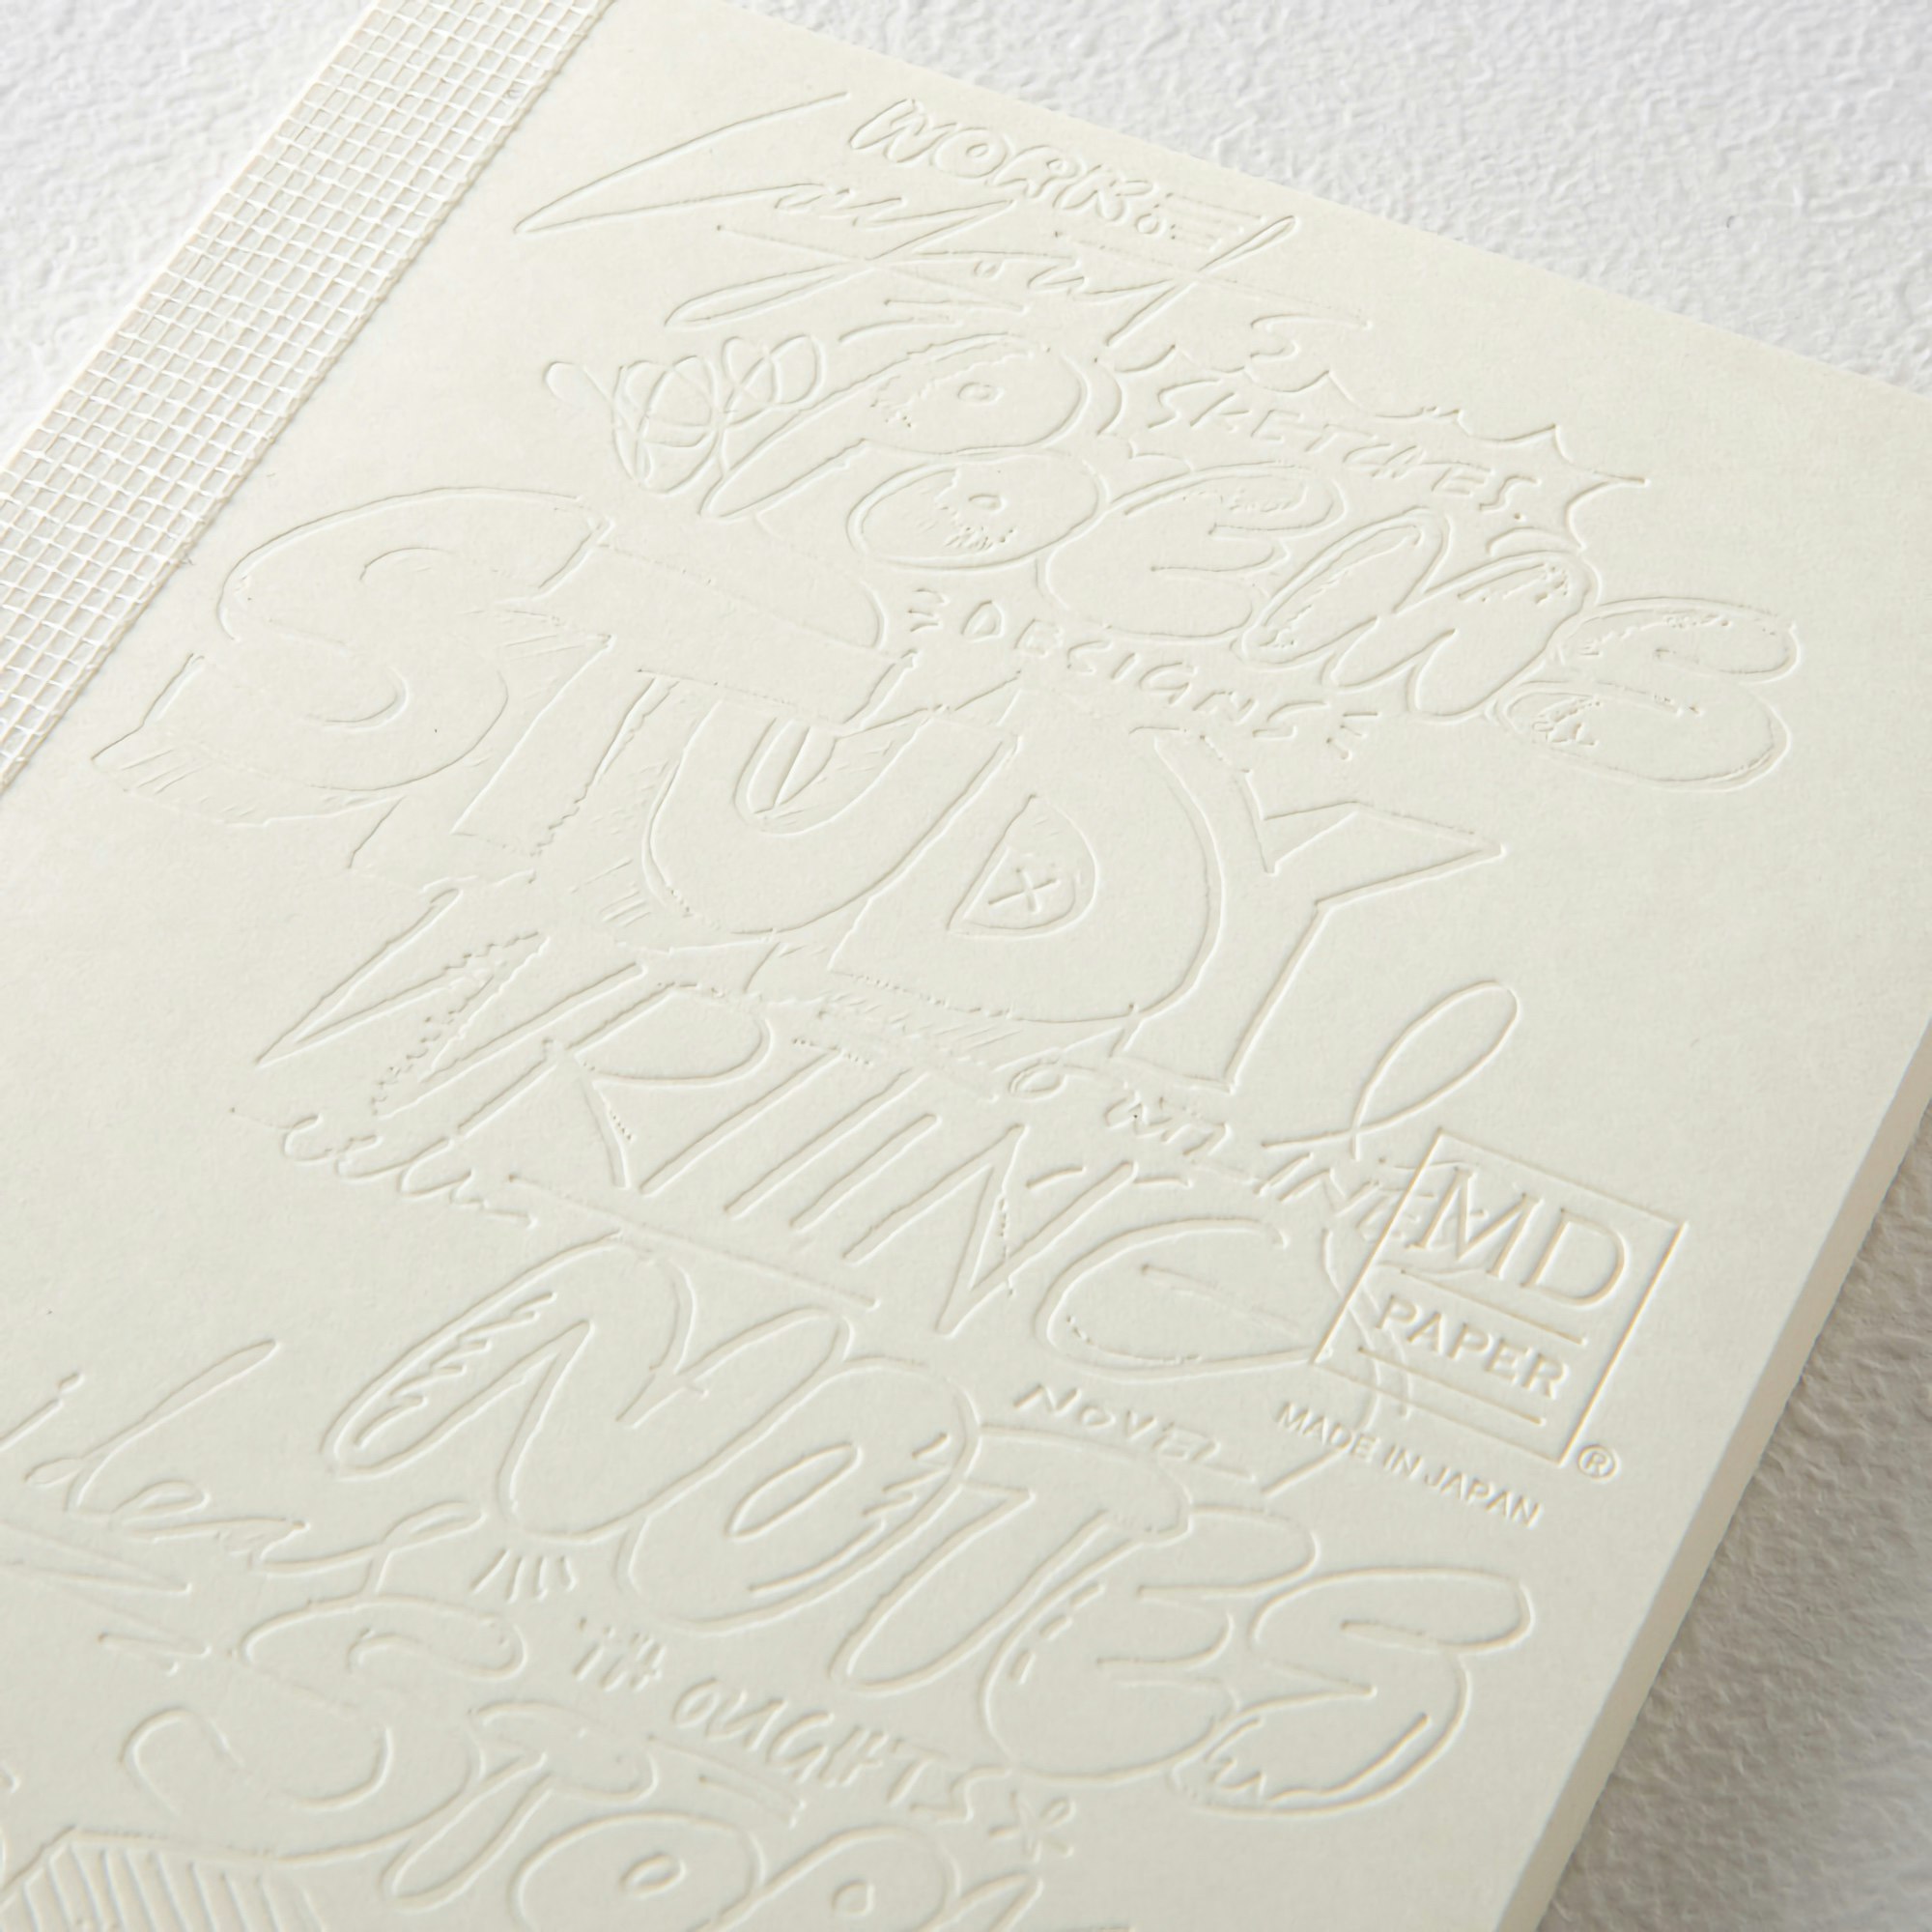 Midori MD Notebook [A6] Blank Artist Collaboration Aries Moross 15th Anniversary [Limited Edition]